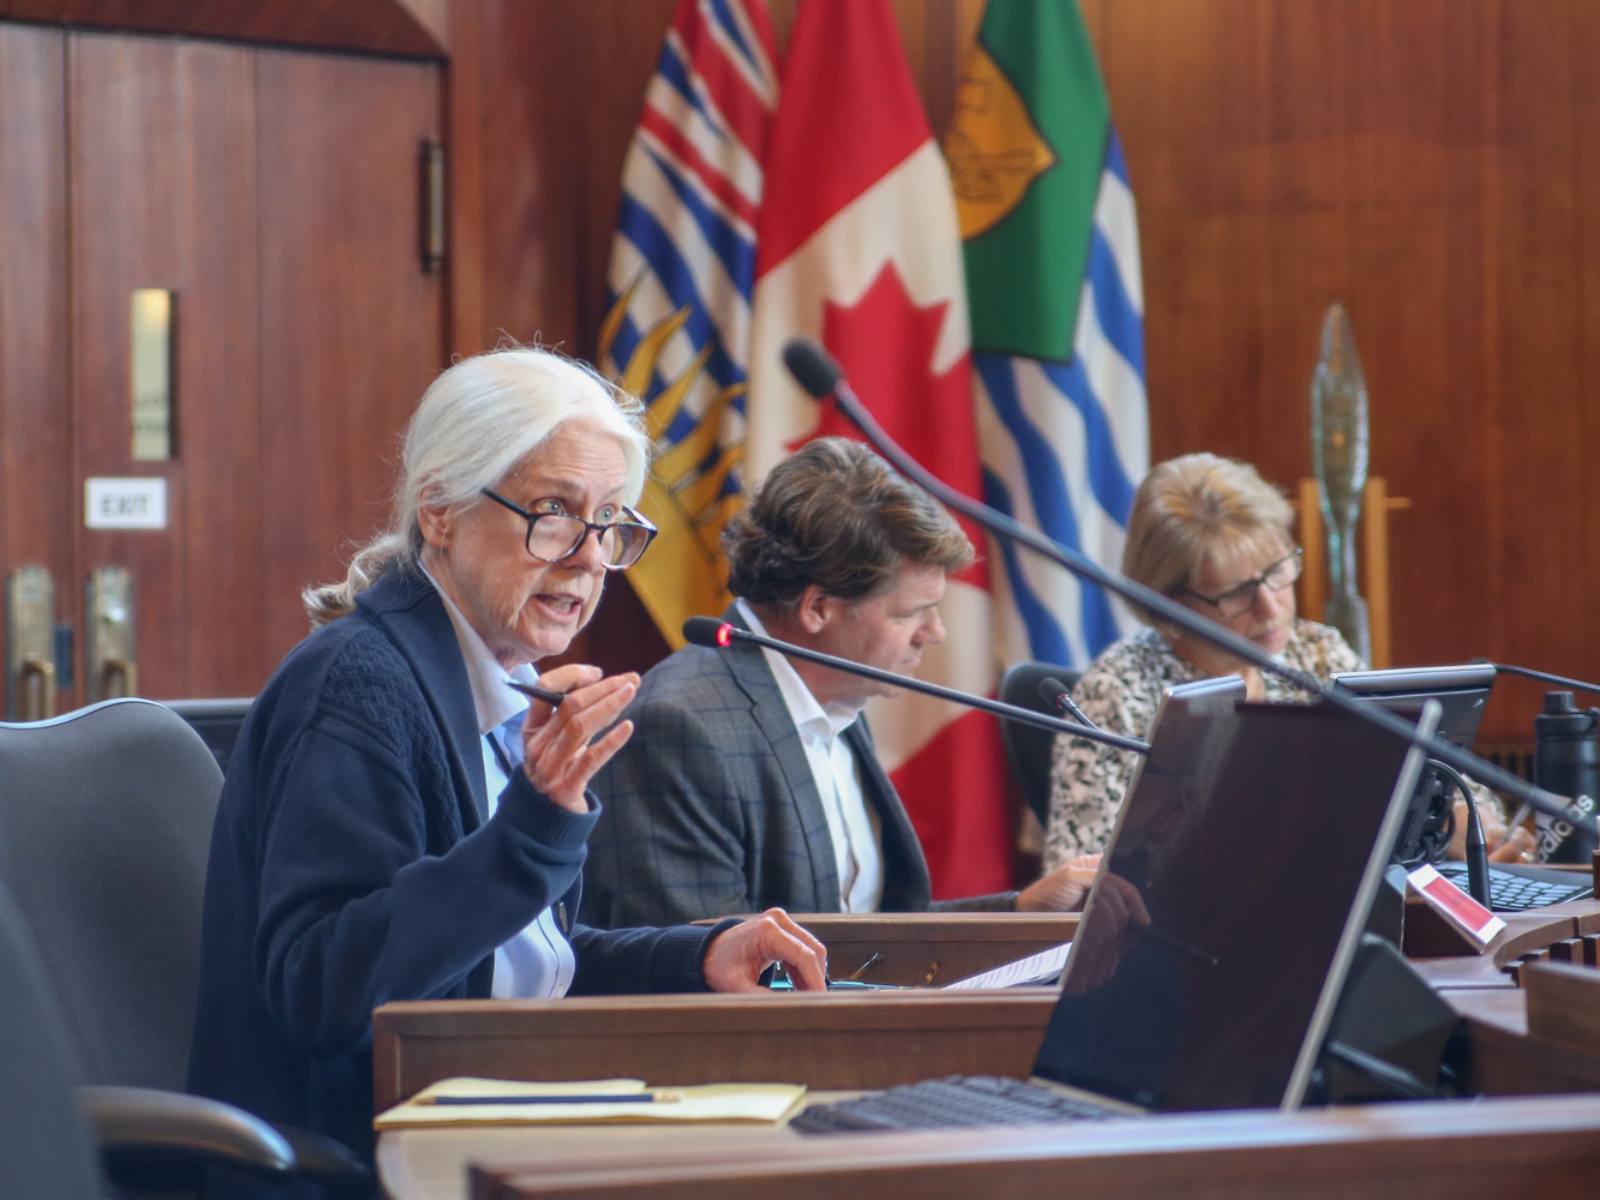 A women with white hair sits in a grand council chamber with a microphone in front of her. There is a man and a woman behind here.